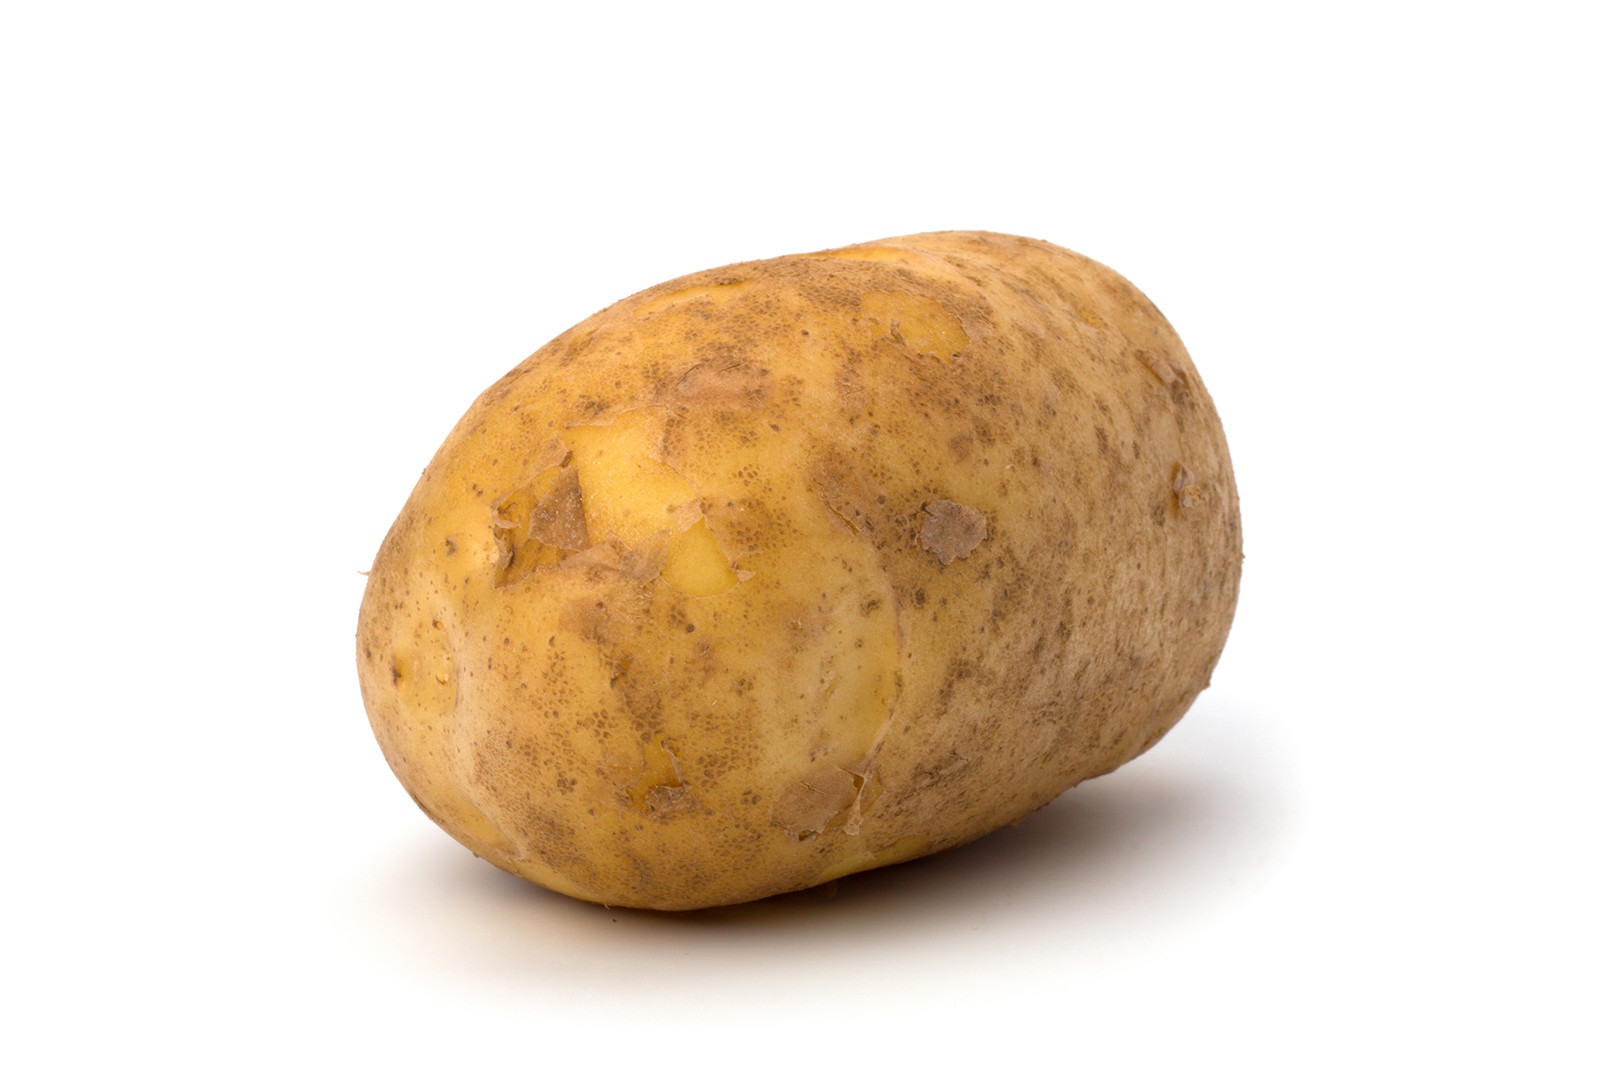 Image of a potato - a staple in any diet